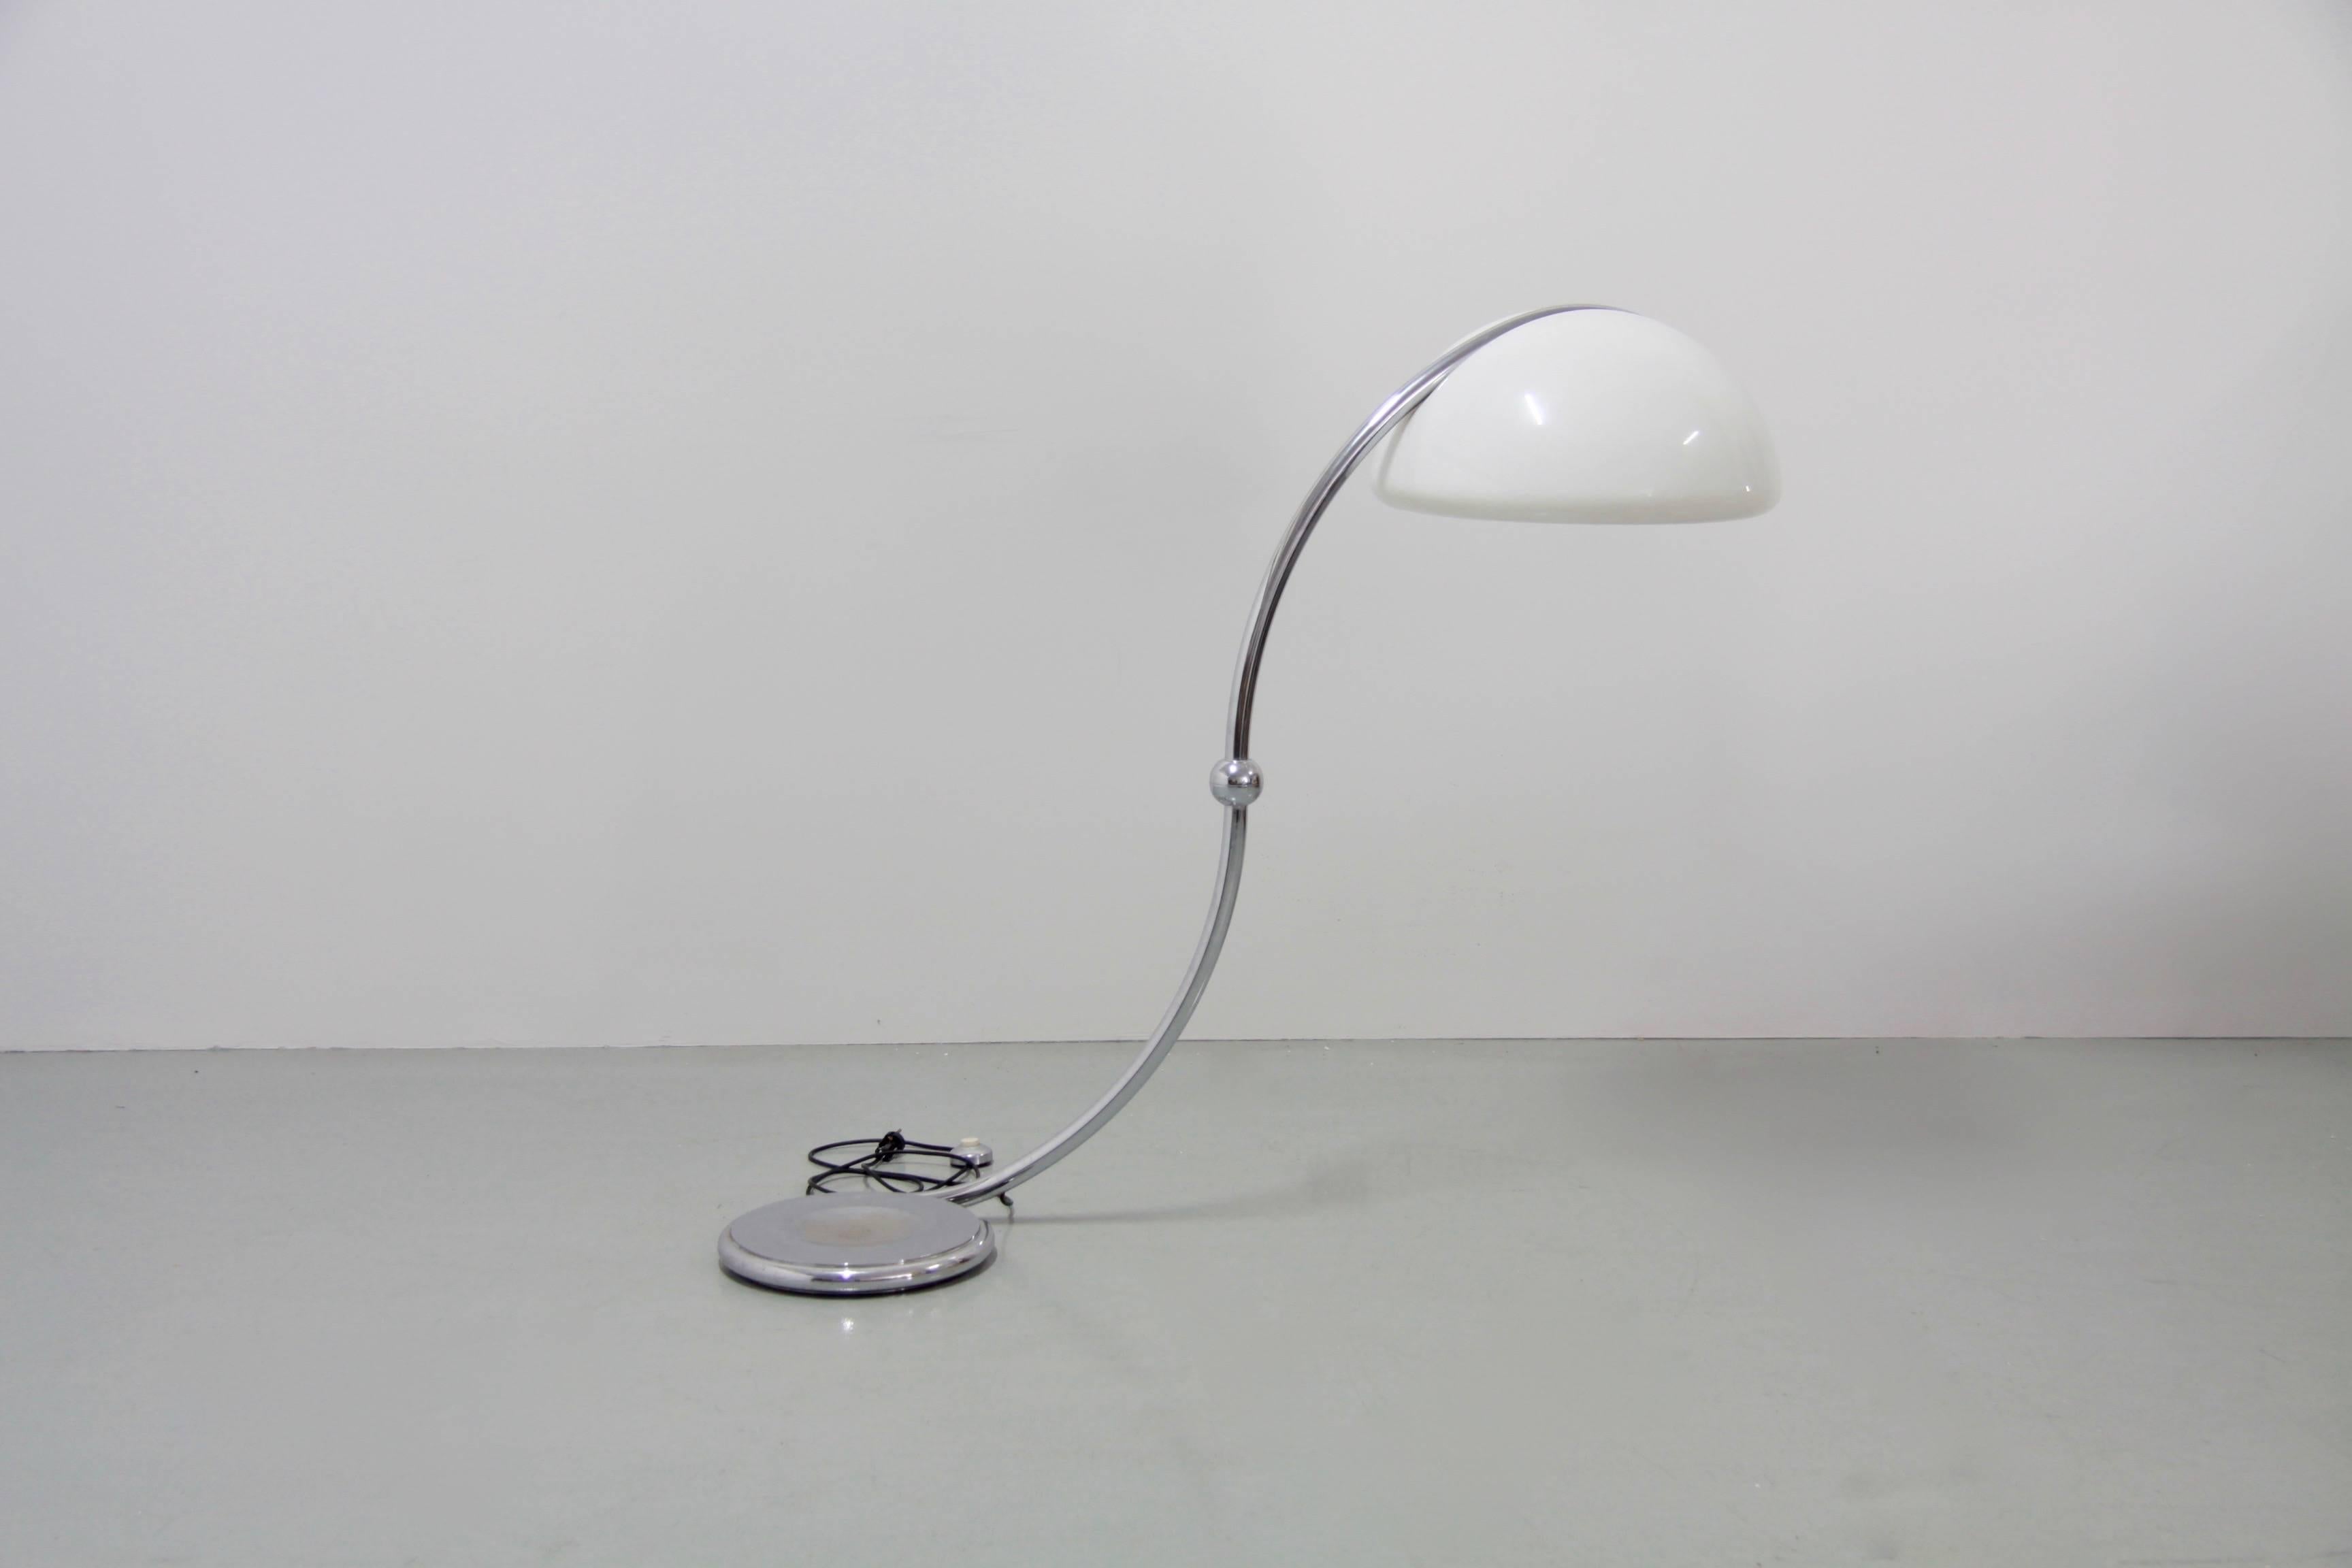 This Serpente chrome floor lamp was made by Martinelli Luce and designed by Elio Martinelli. The top half of this lamp pivots 360 degrees creating a different look each time. This piece is signed with the manufacturer's label on the bottom, and the